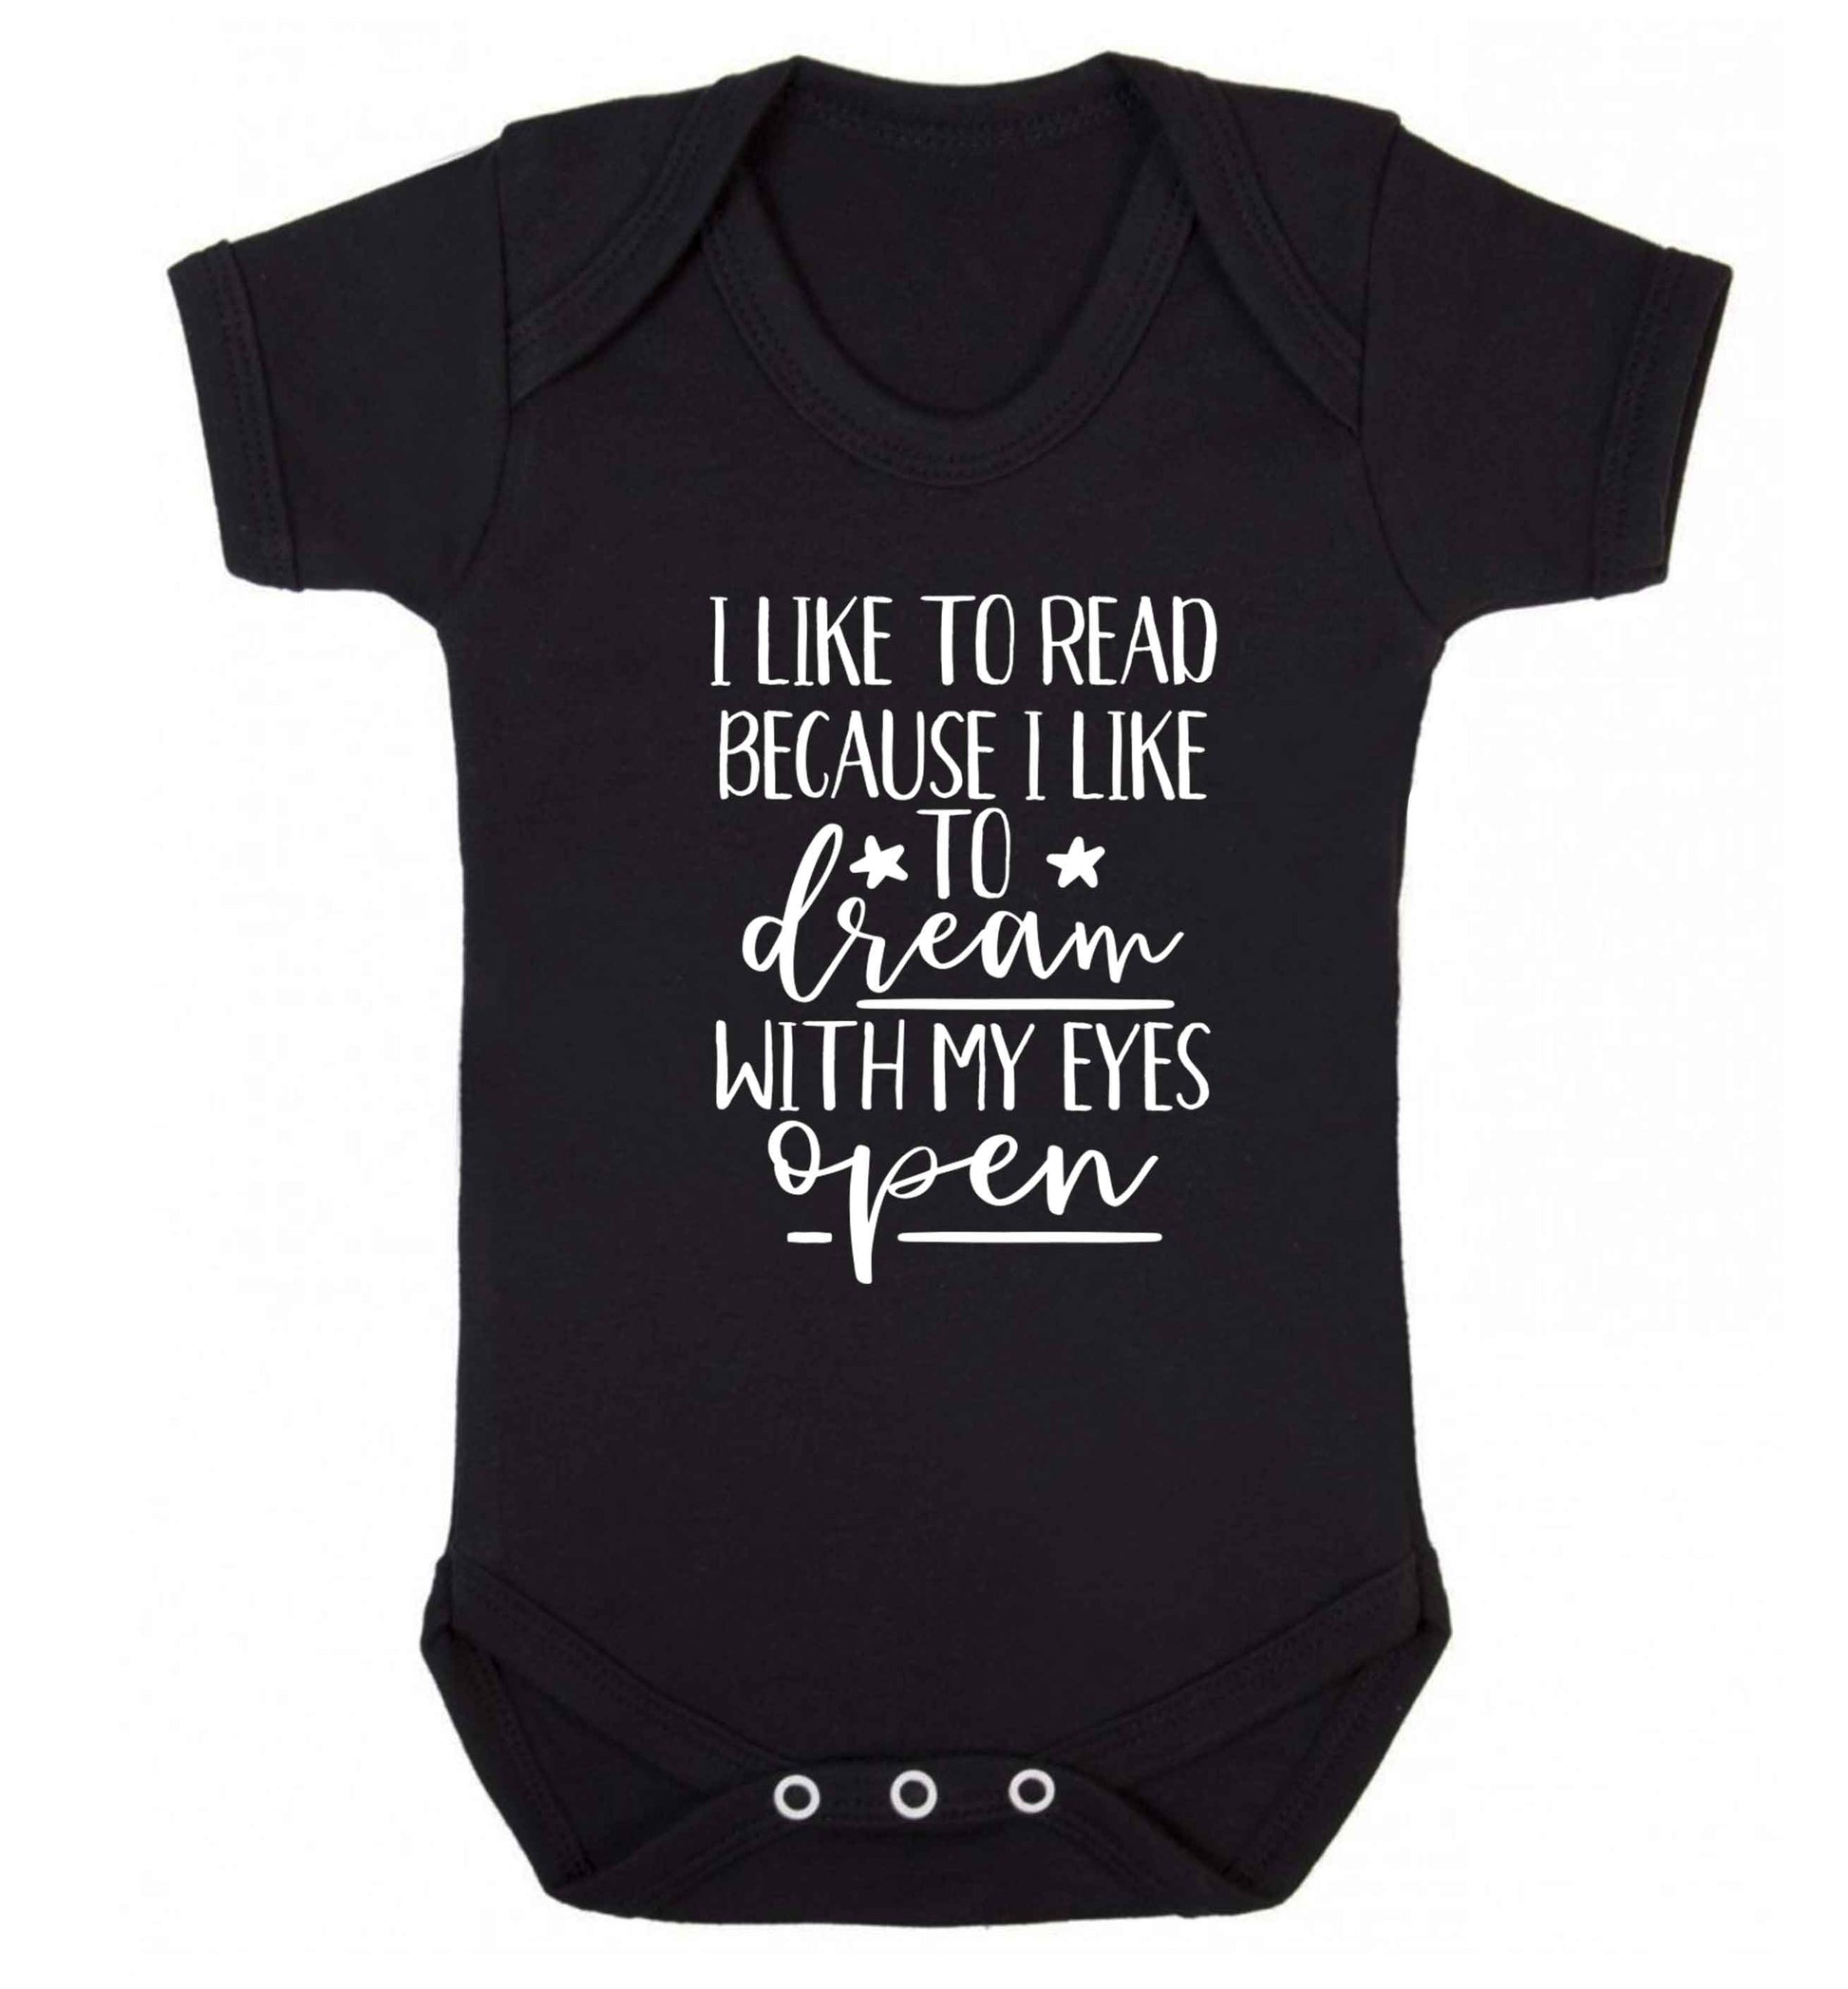 I like to read because I like to dream with my eyes open Baby Vest black 18-24 months